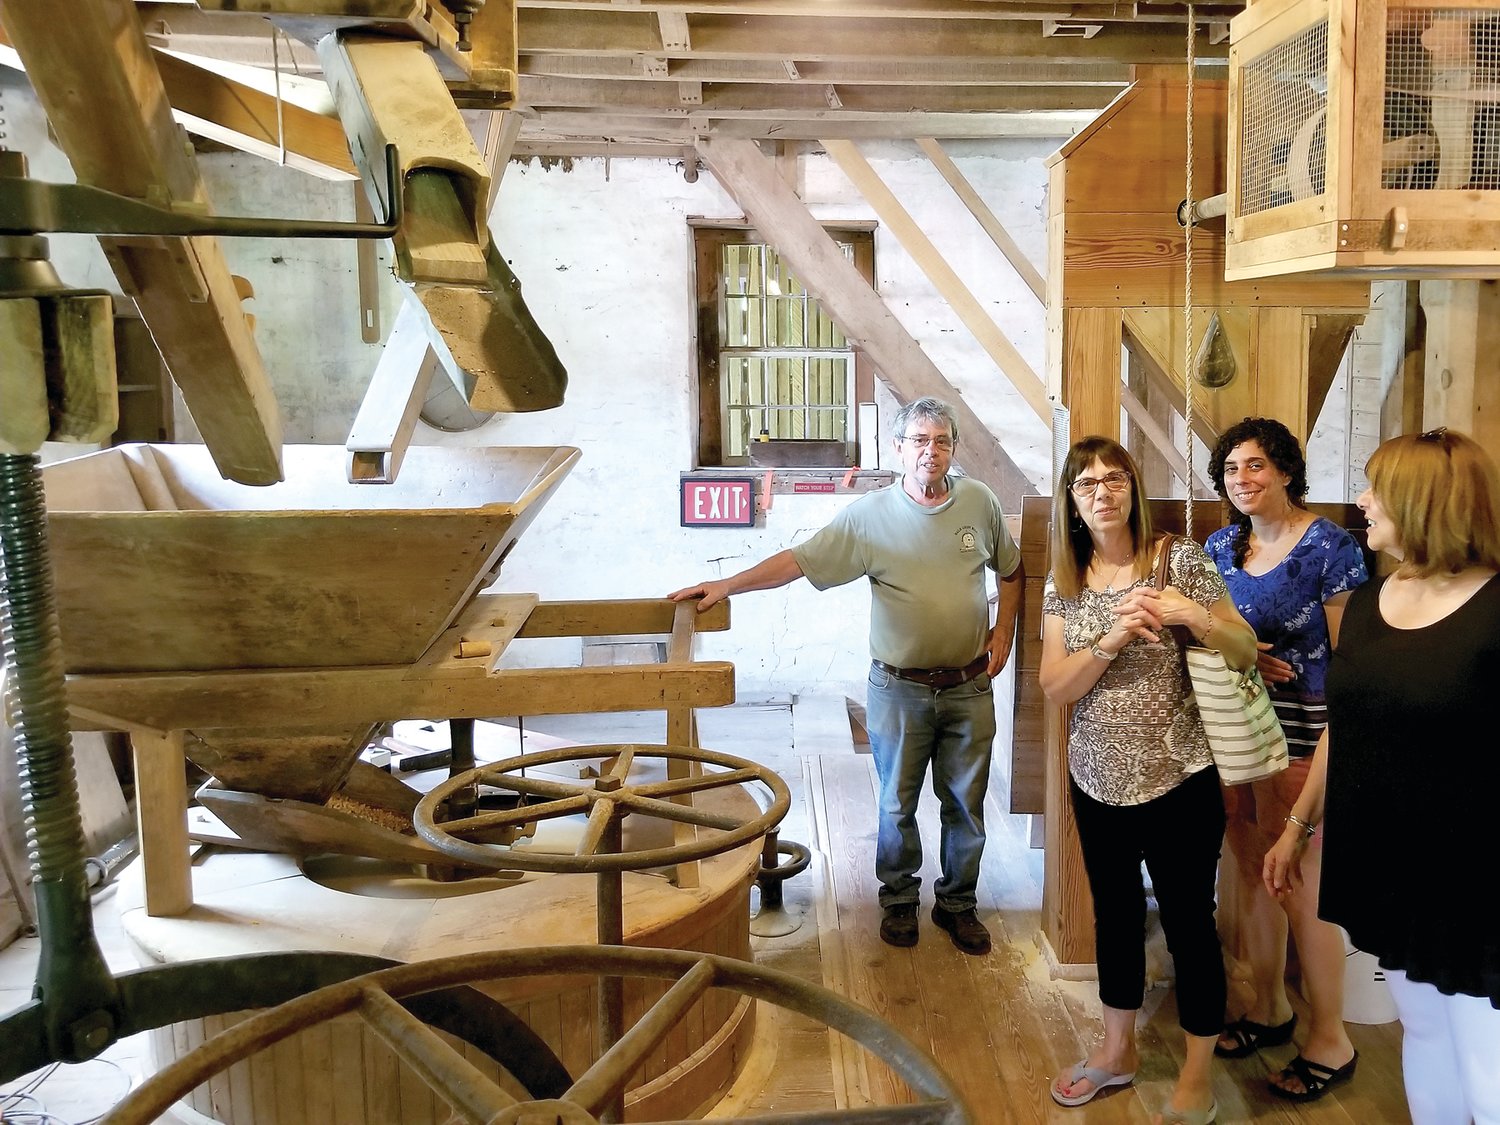 Visitors tour the nationally historic Stover-Myers Mill, which will again be open Saturdays and Sundays through October.